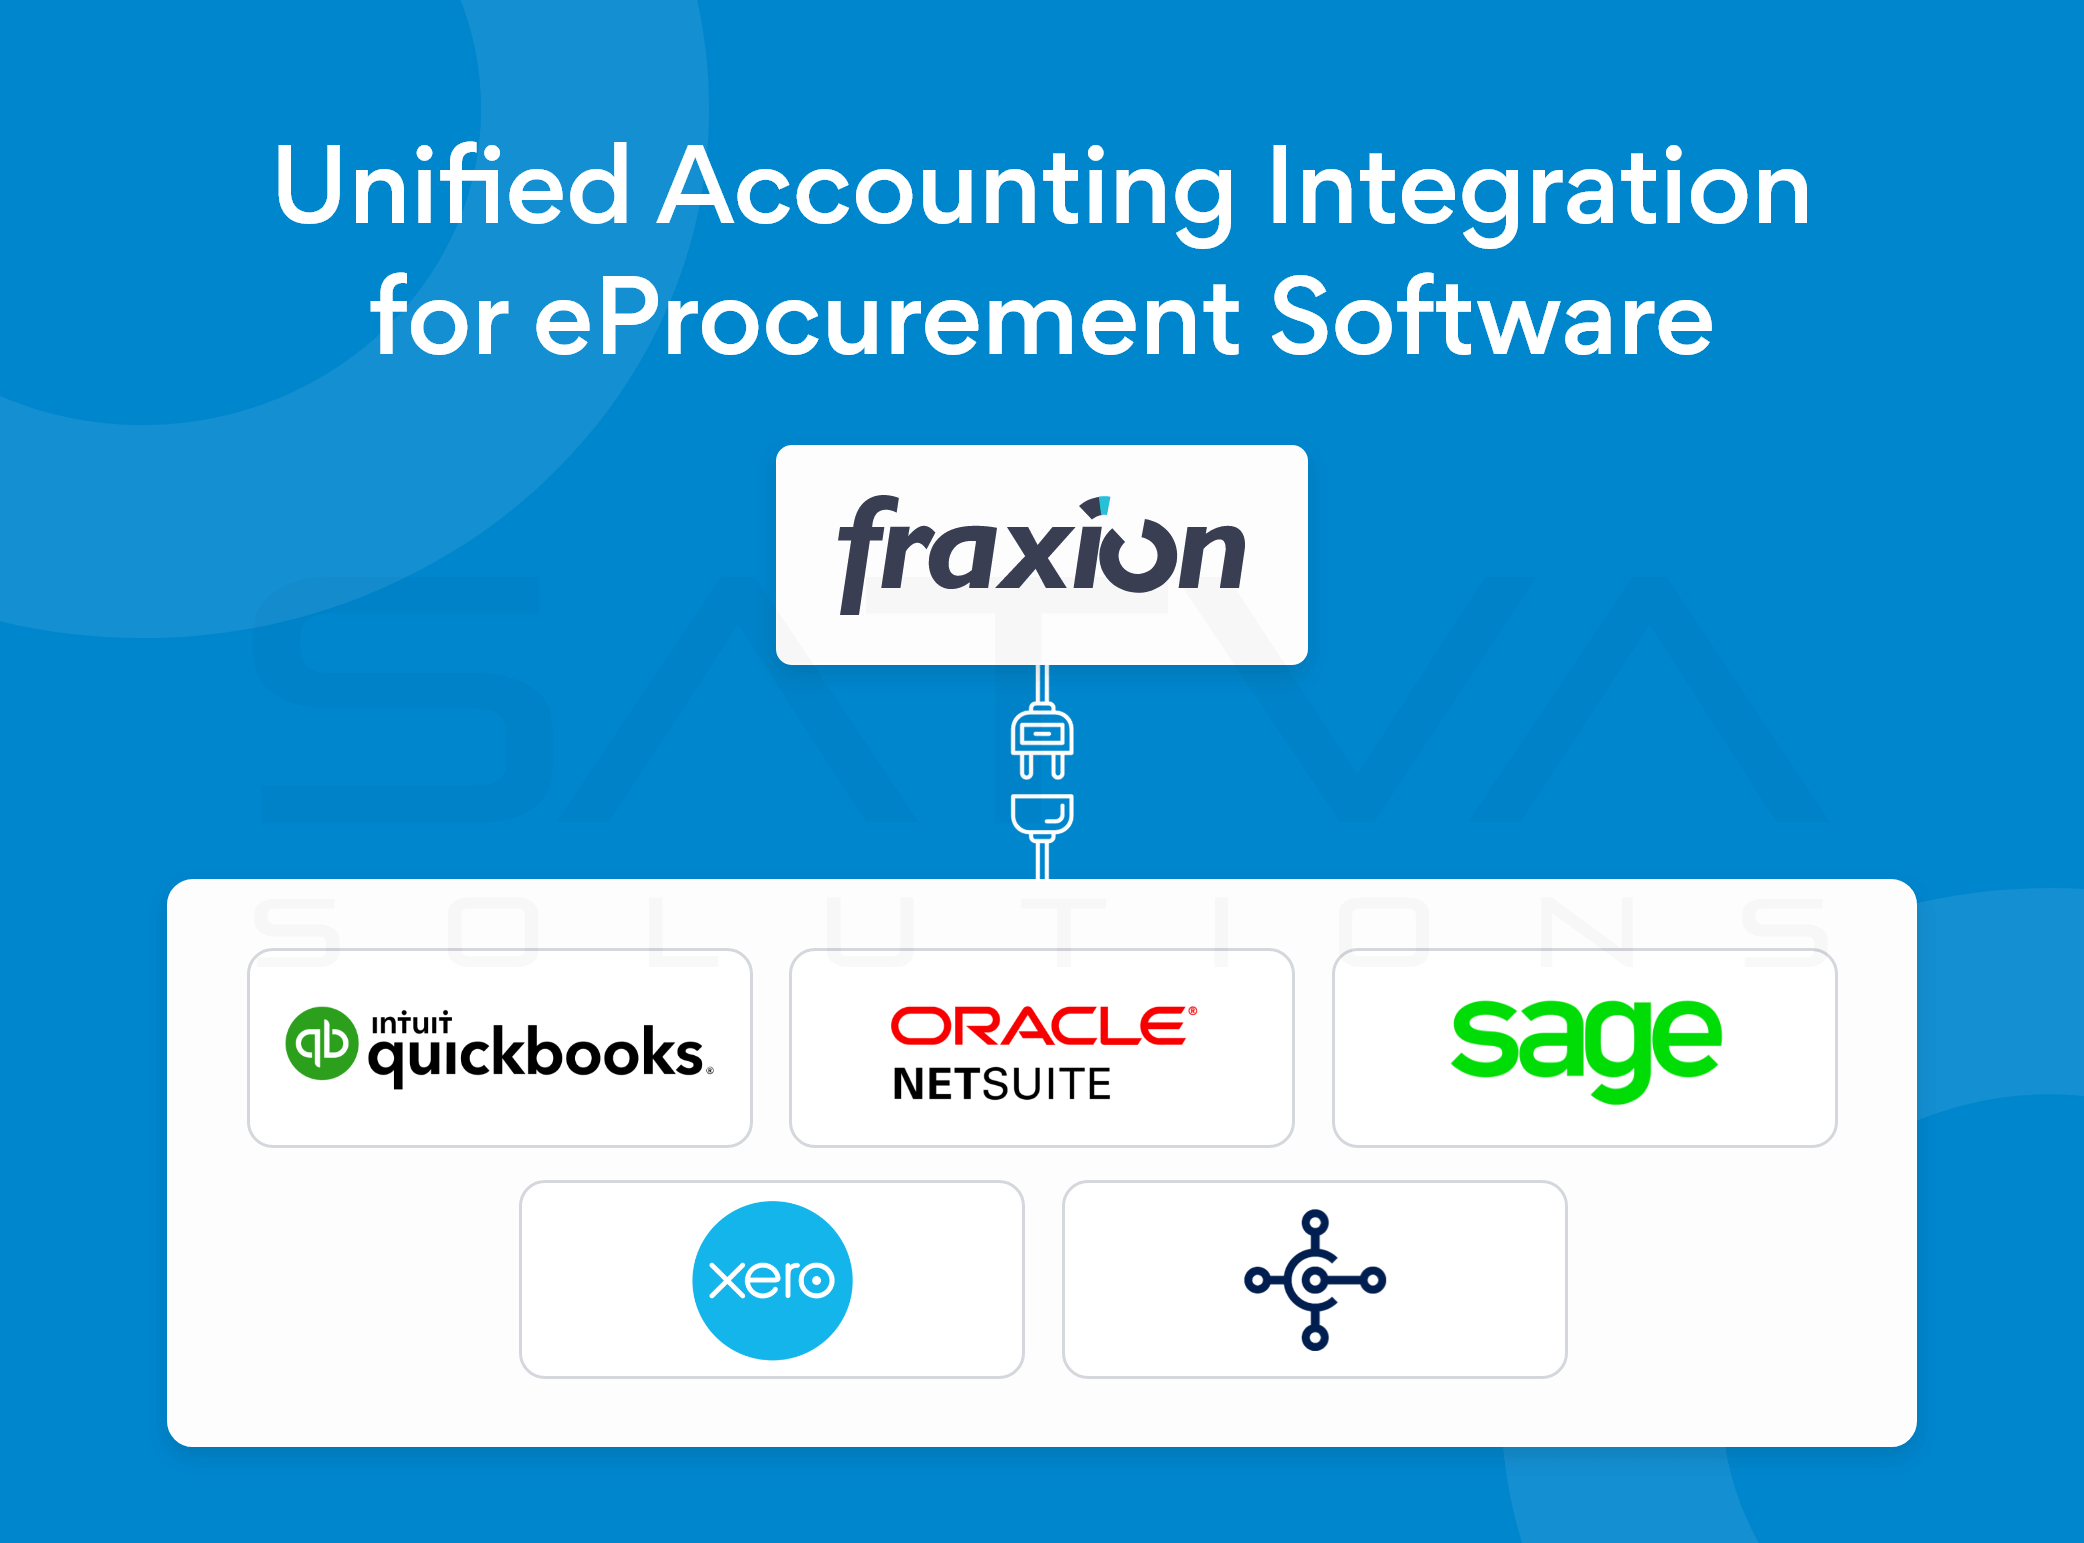 Unified Accounting Integration for eProcurement Software